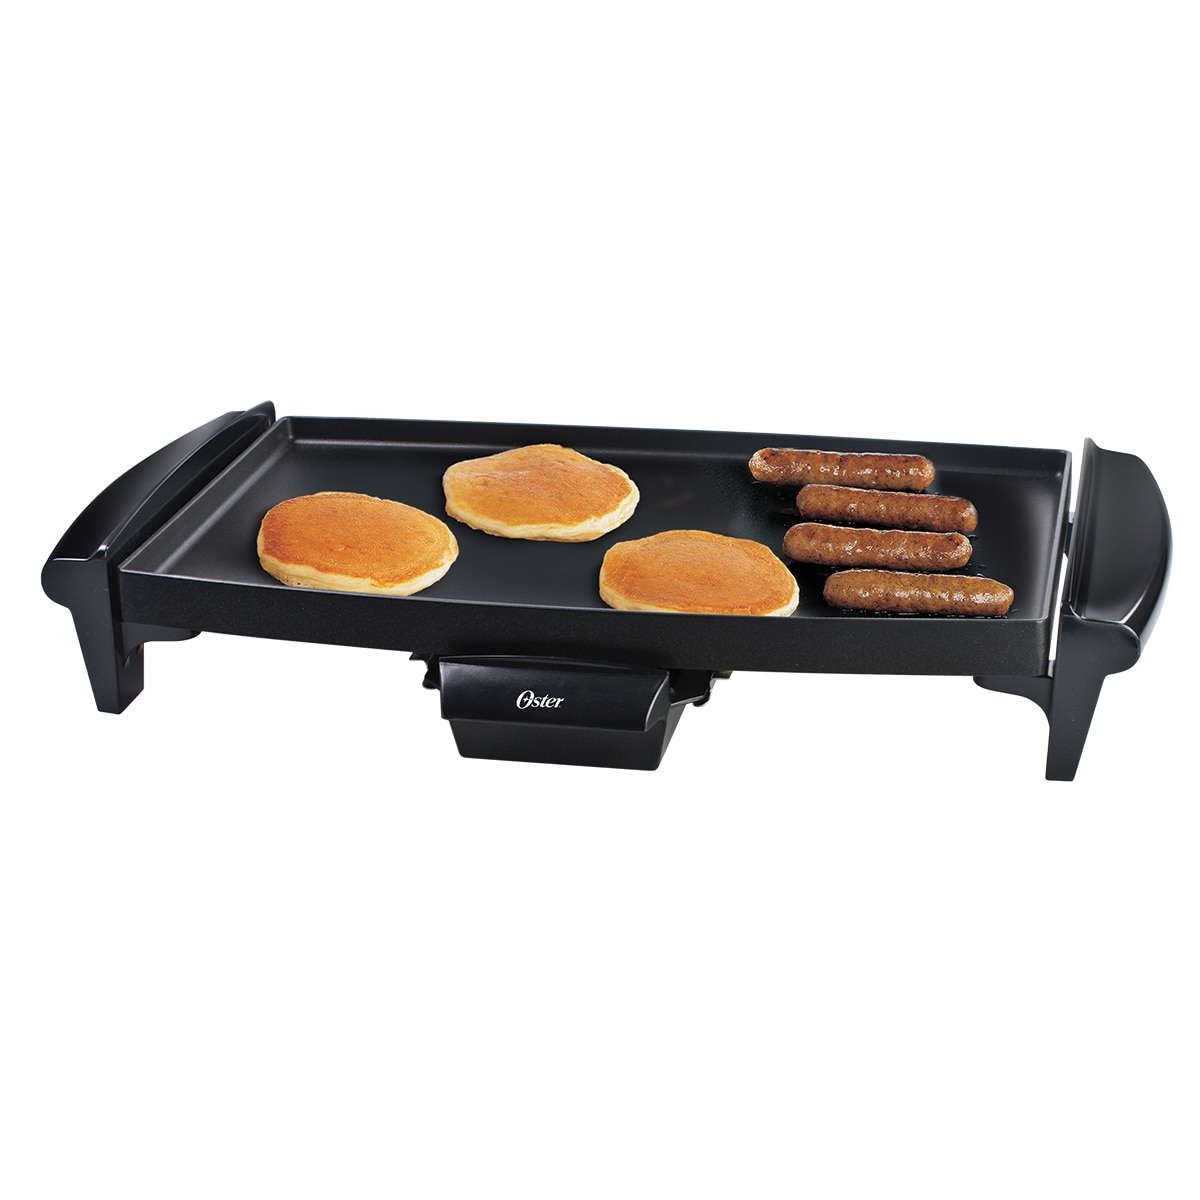 Chicken Electric Griddle for Pancakes Sold by IVY Eggs 1200W, Black 10x21 Nonstick Electric Griddle Handmade Stone-Derived Steaks Bacon Vegetable Sausages 